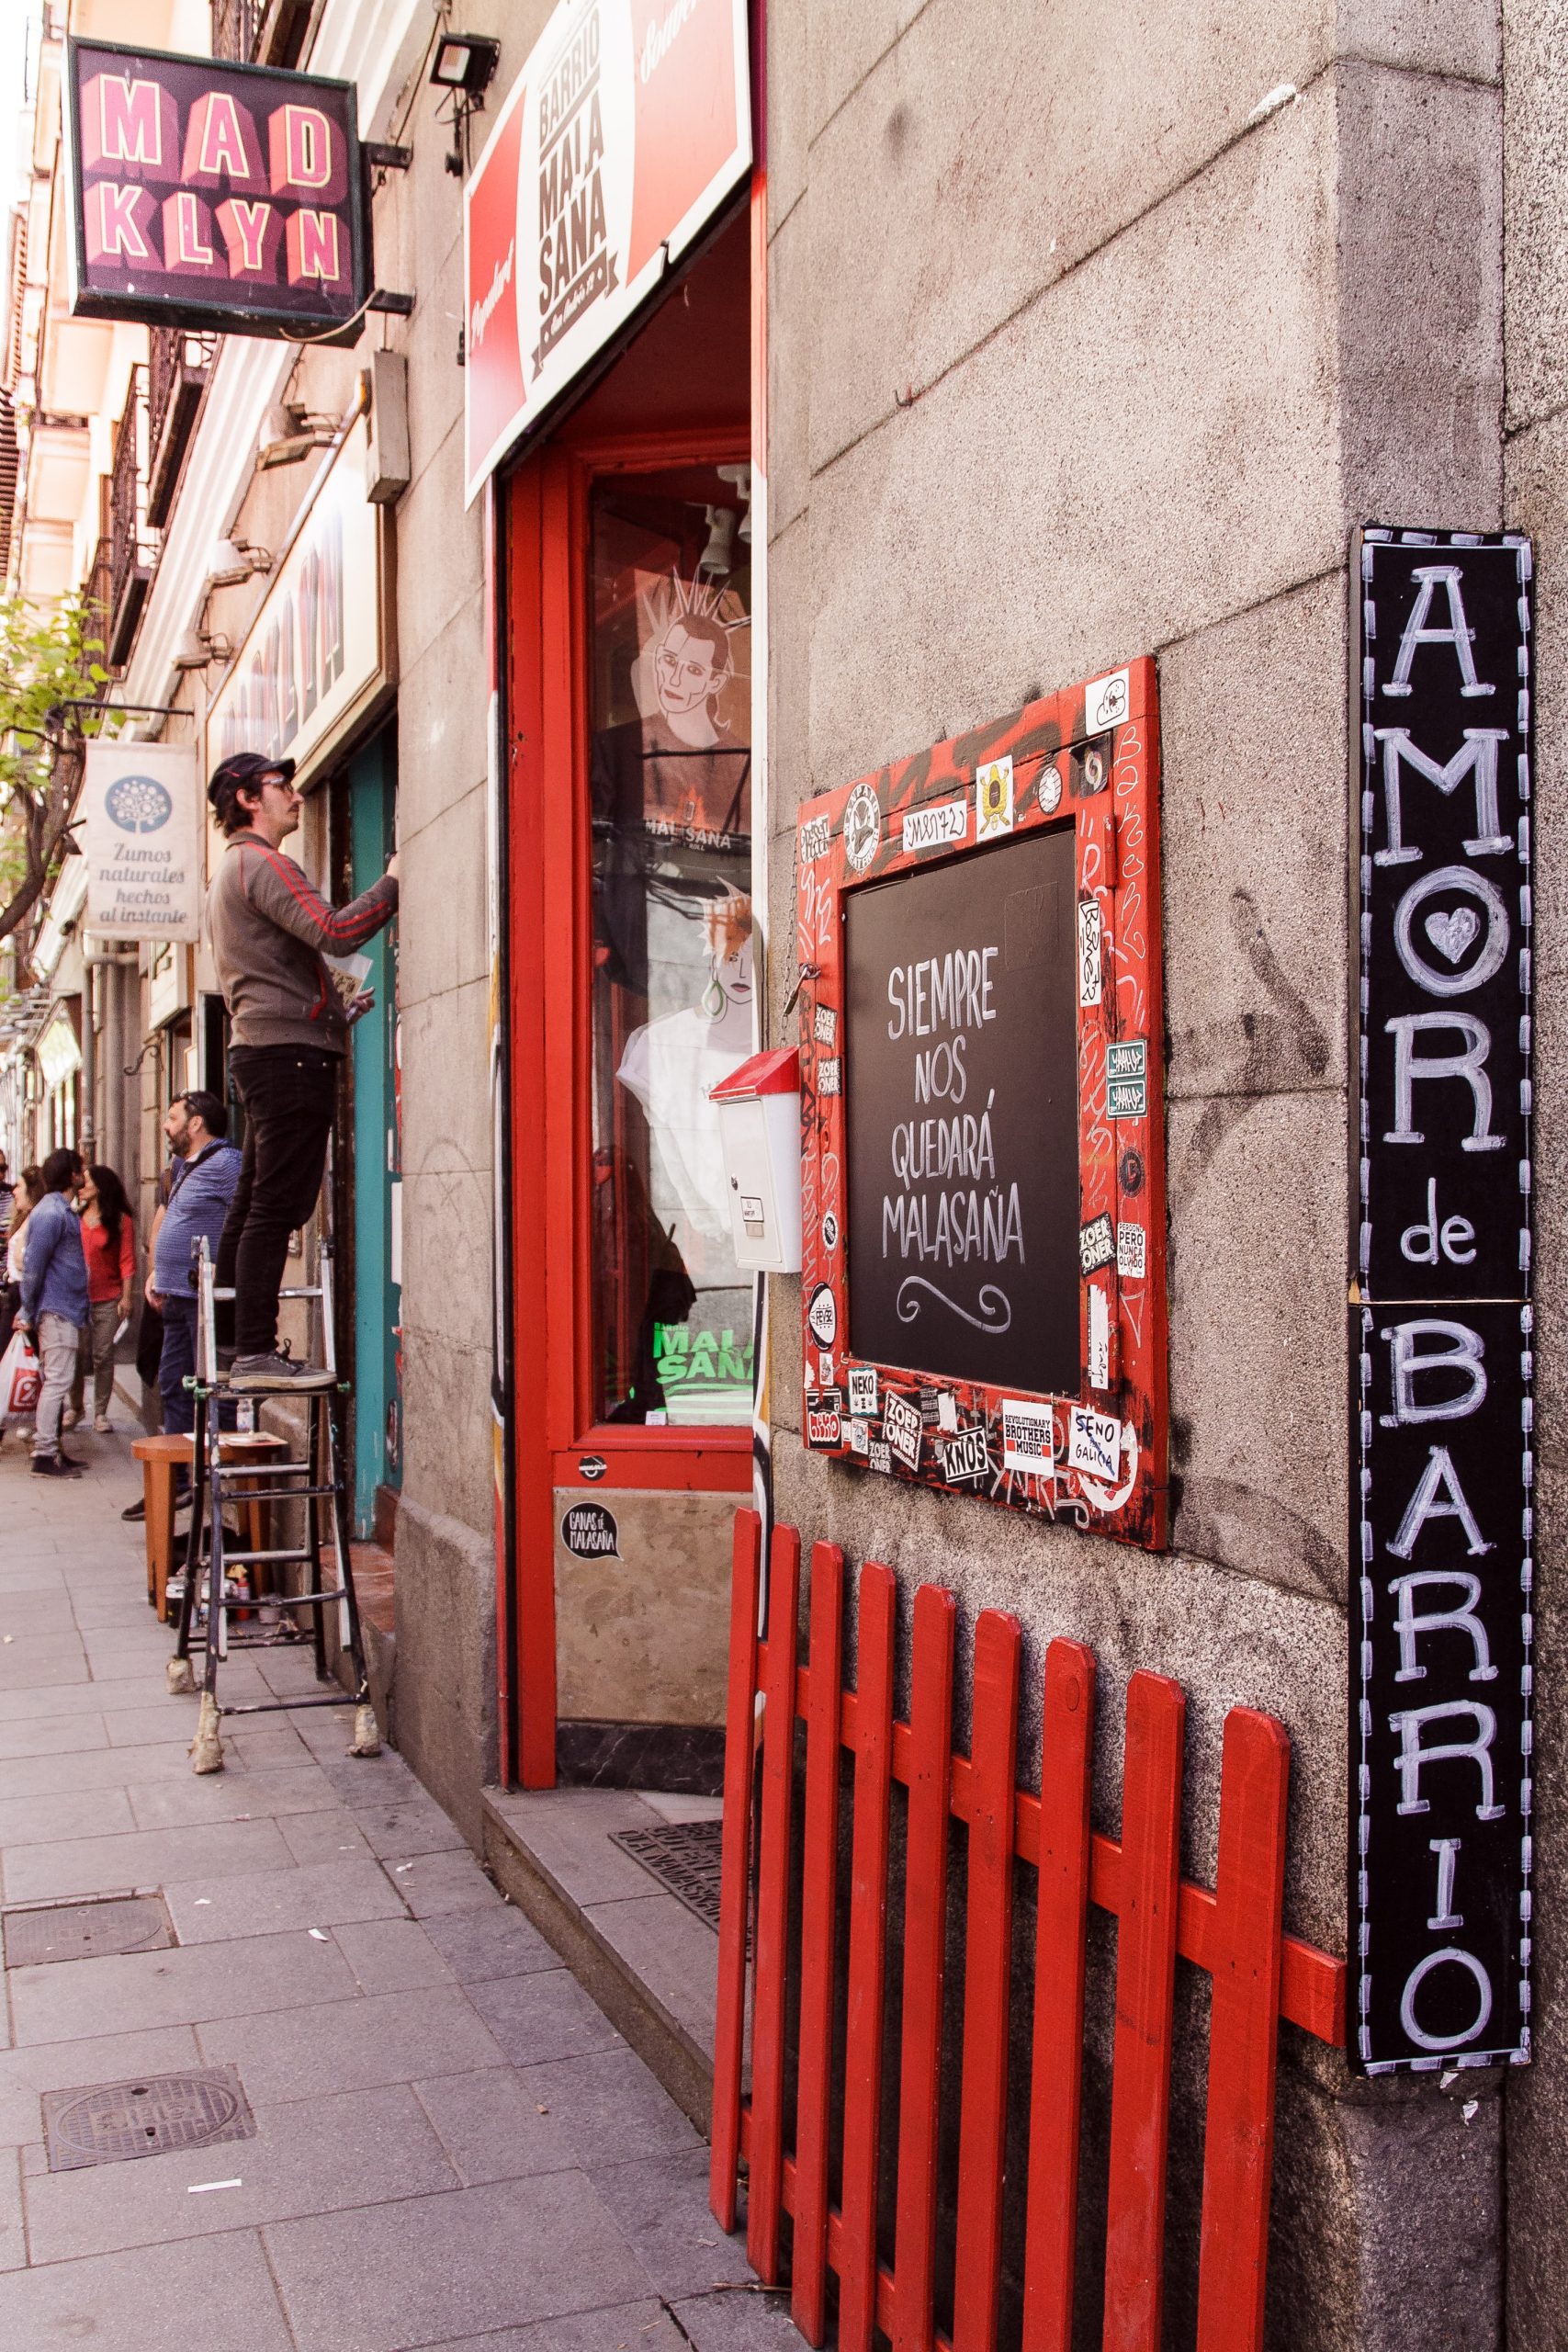 Discovering Malasaña: The most surprising spots in this Madrid district